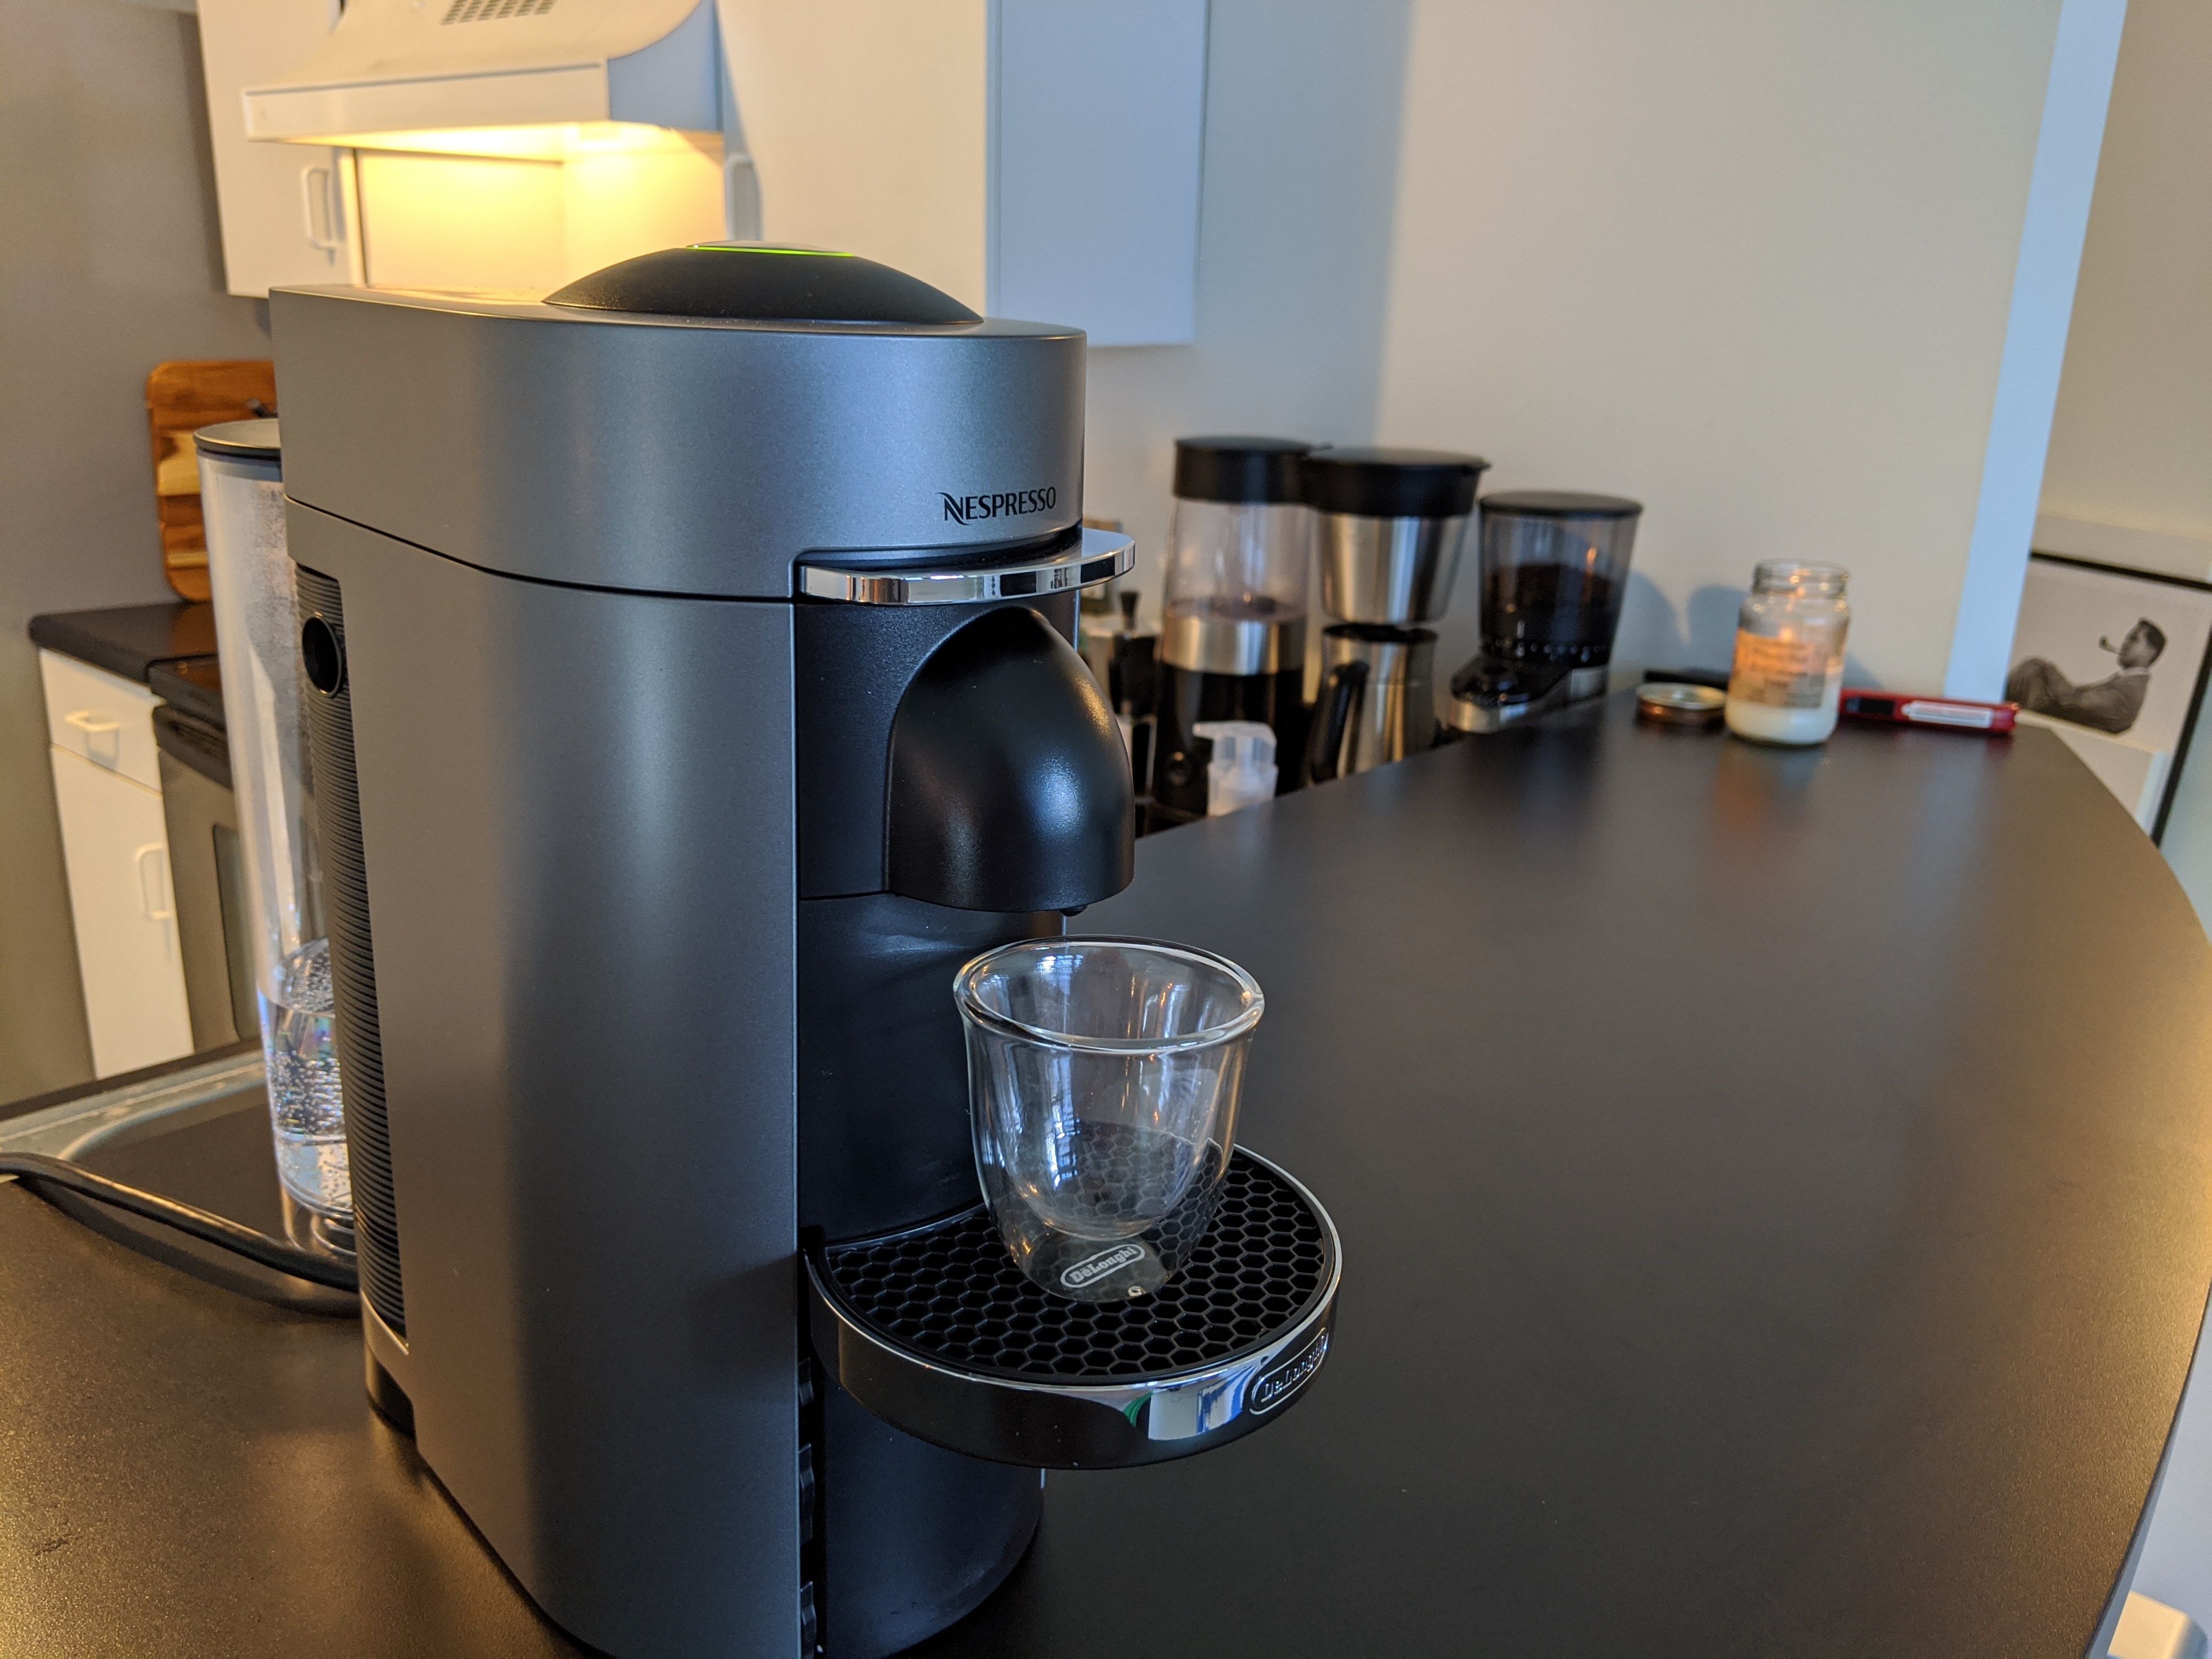 Why the Nespresso VertuoPlus is my favorite coffee maker